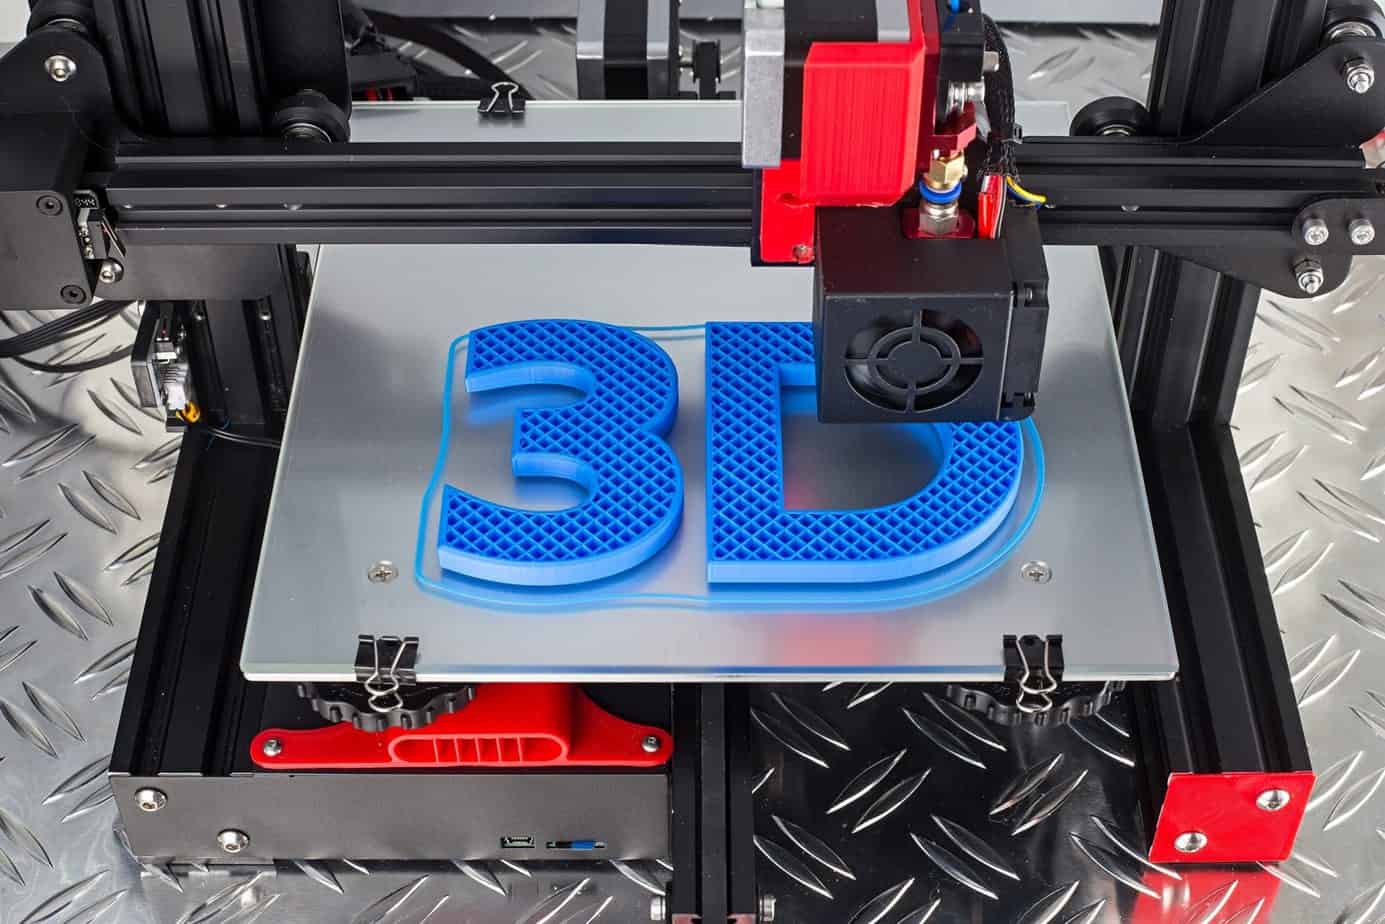 3D printing – what is worth knowing about it?